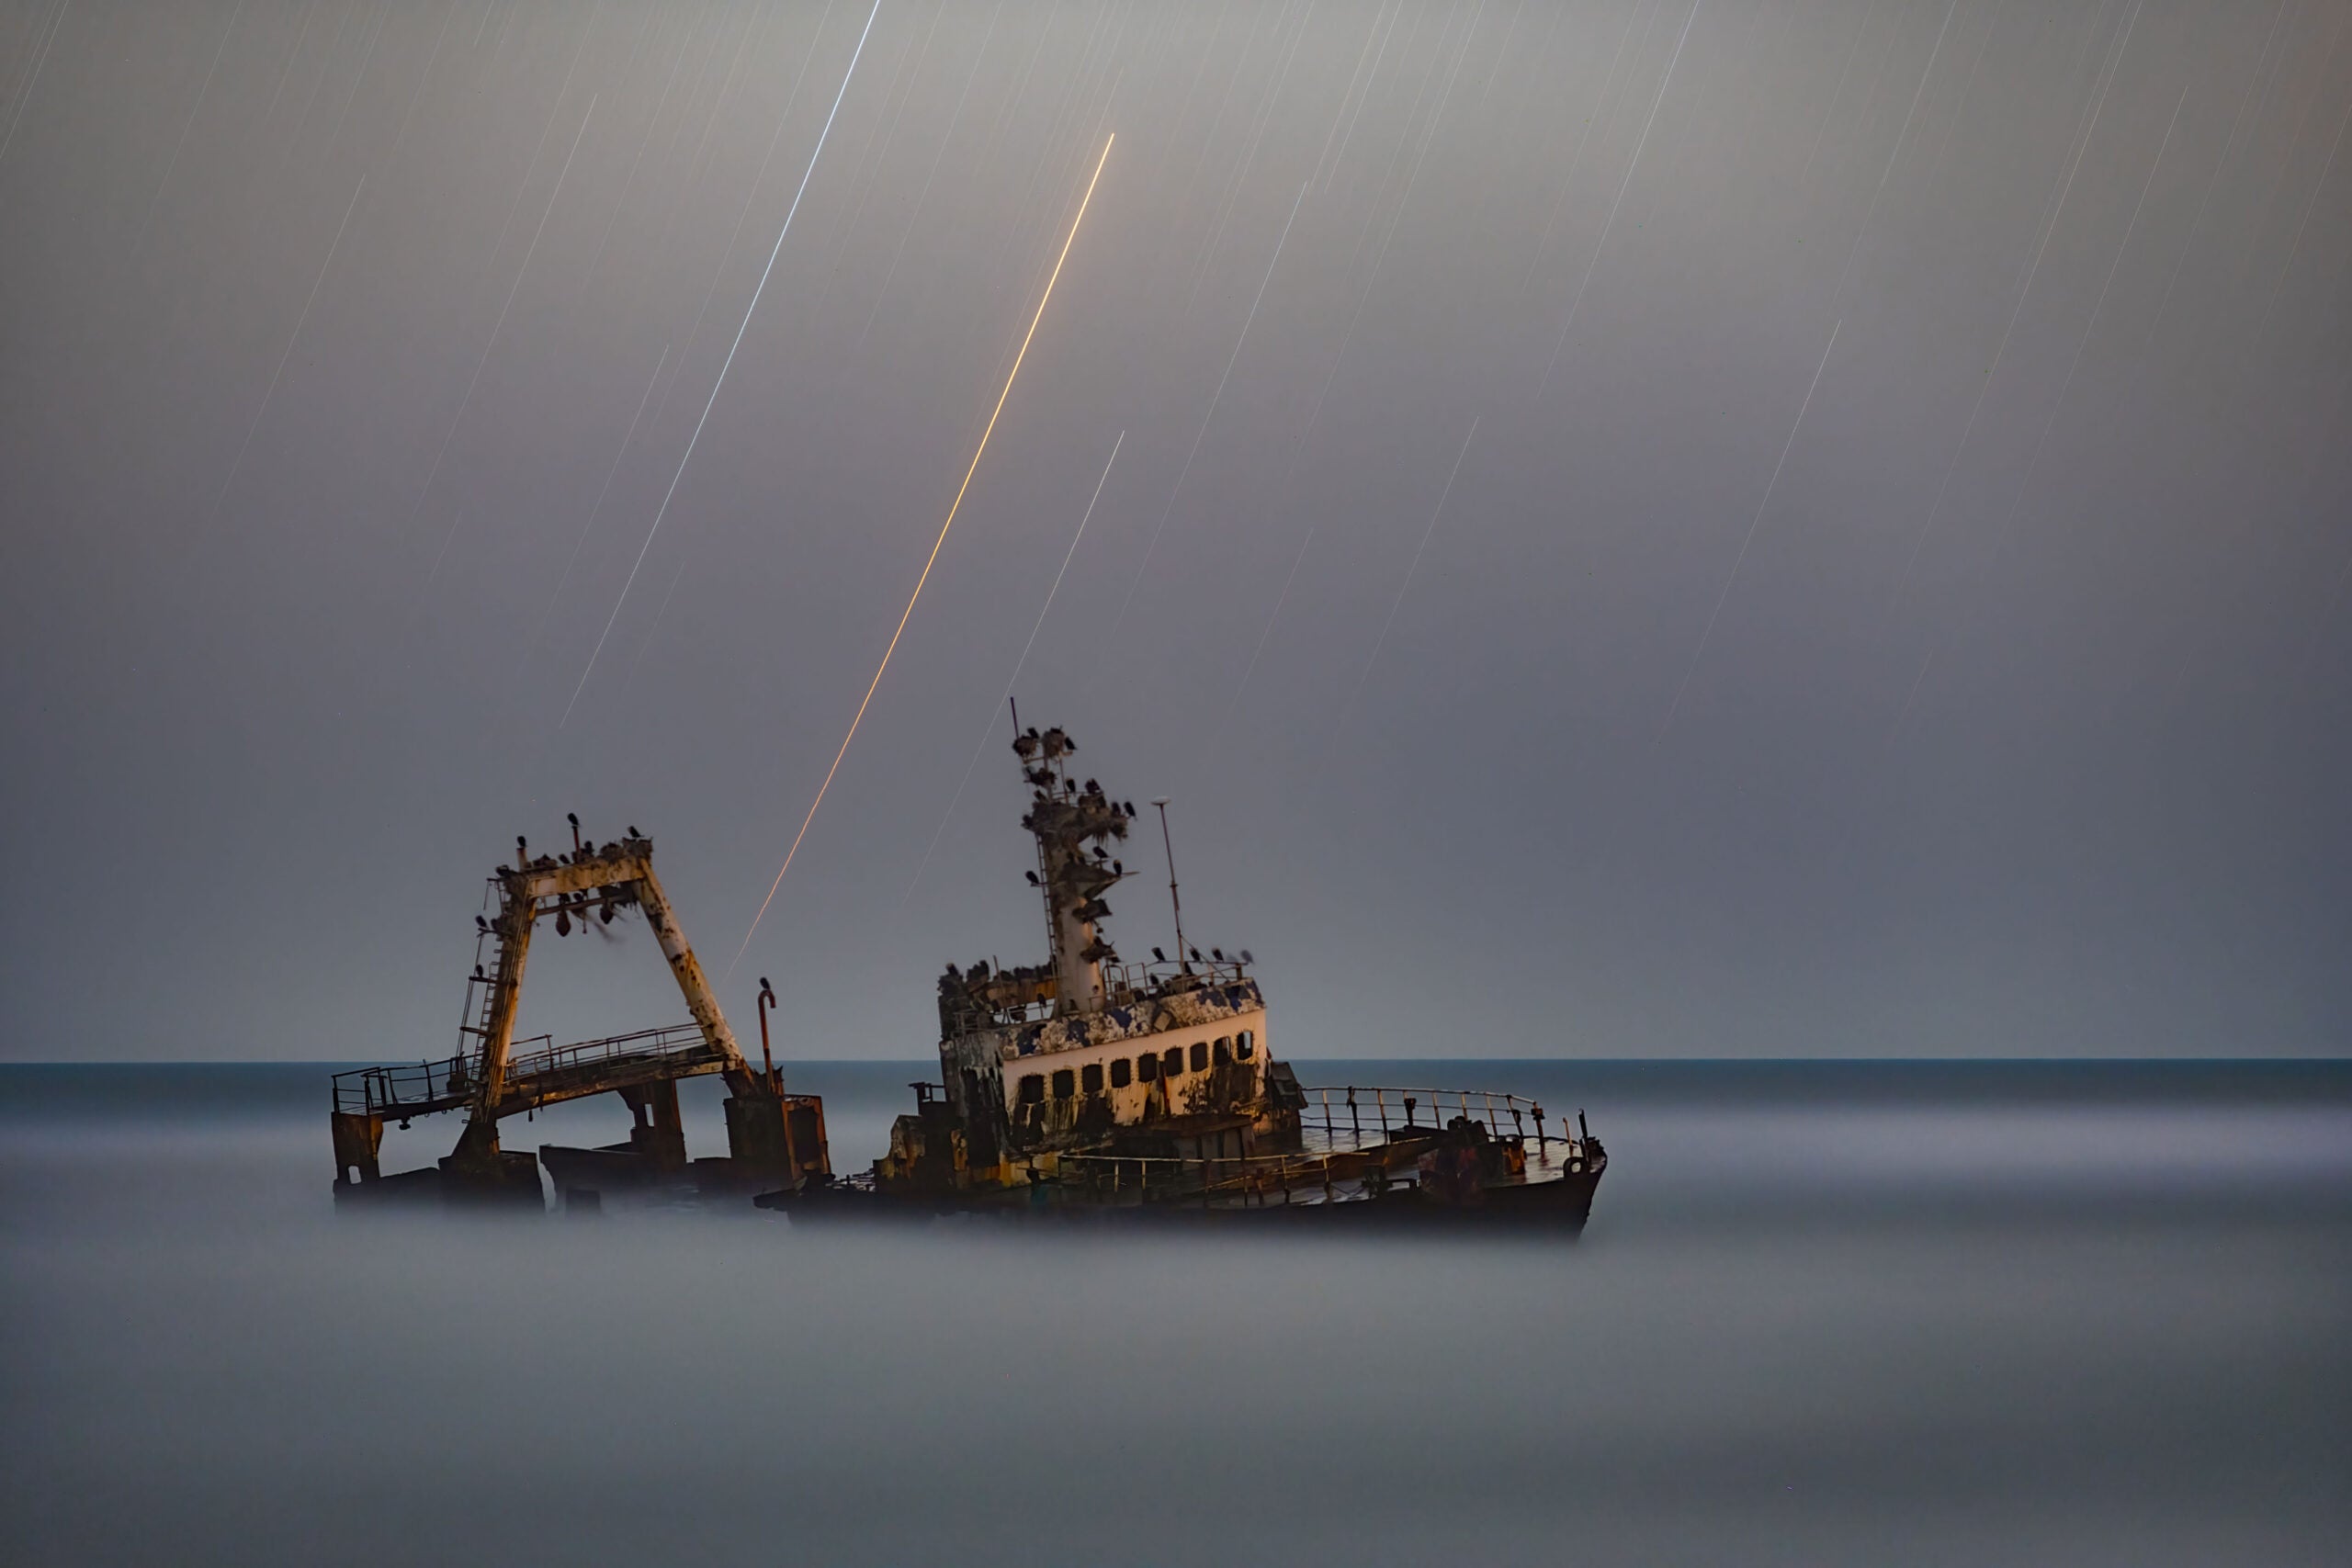 A shipwreck disappears in the fog under stars